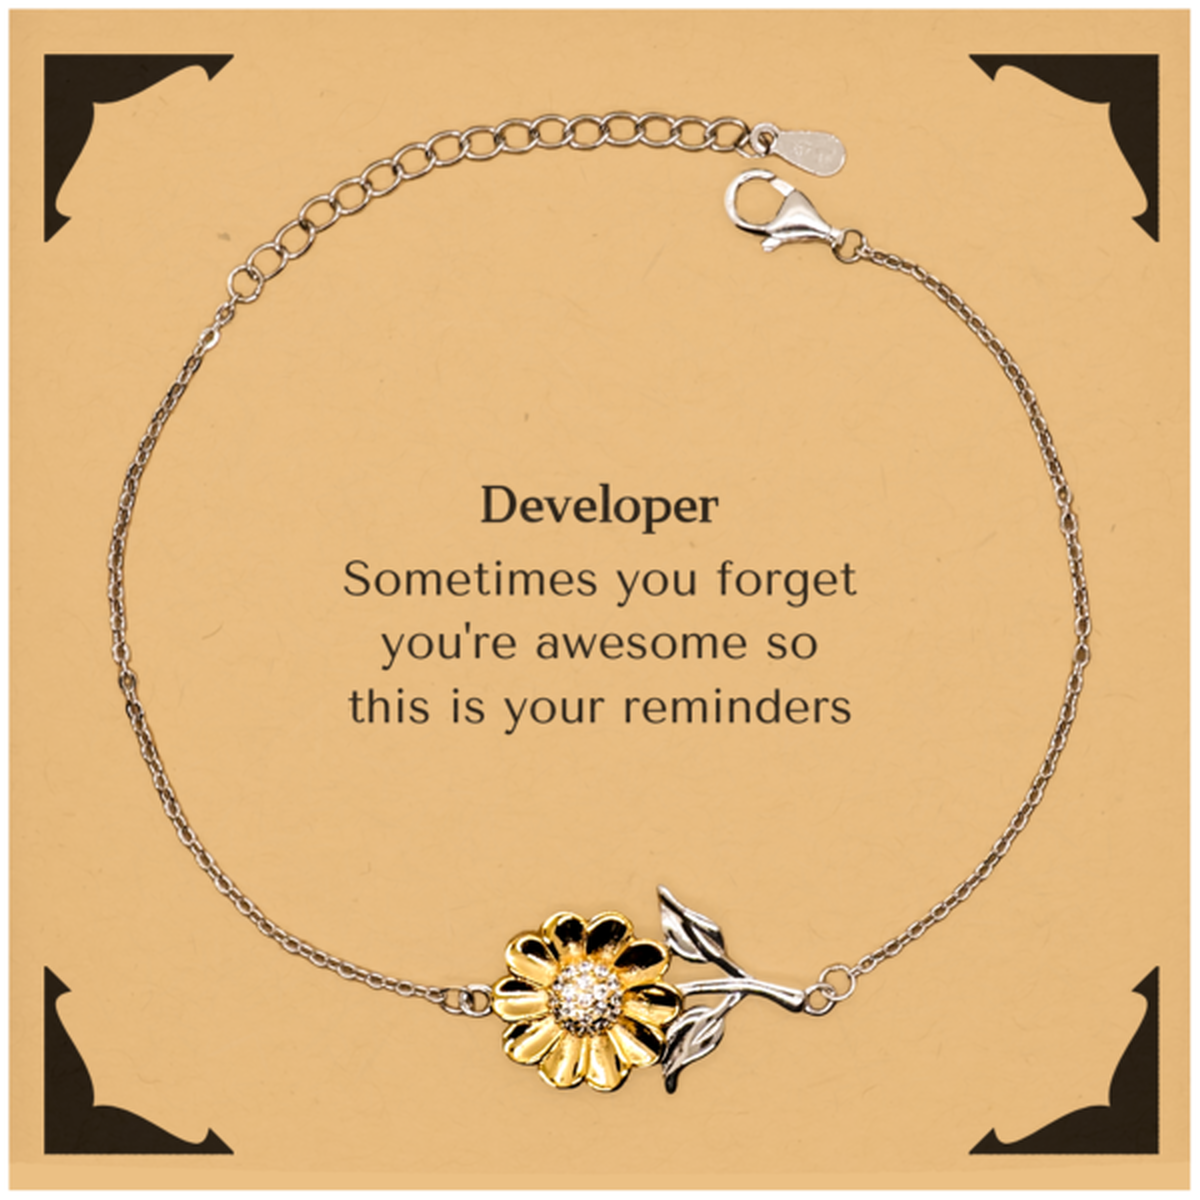 Sentimental Developer Sunflower Bracelet, Developer Sometimes you forget you're awesome so this is your reminders, Graduation Christmas Birthday Gifts for Developer, Men, Women, Coworkers